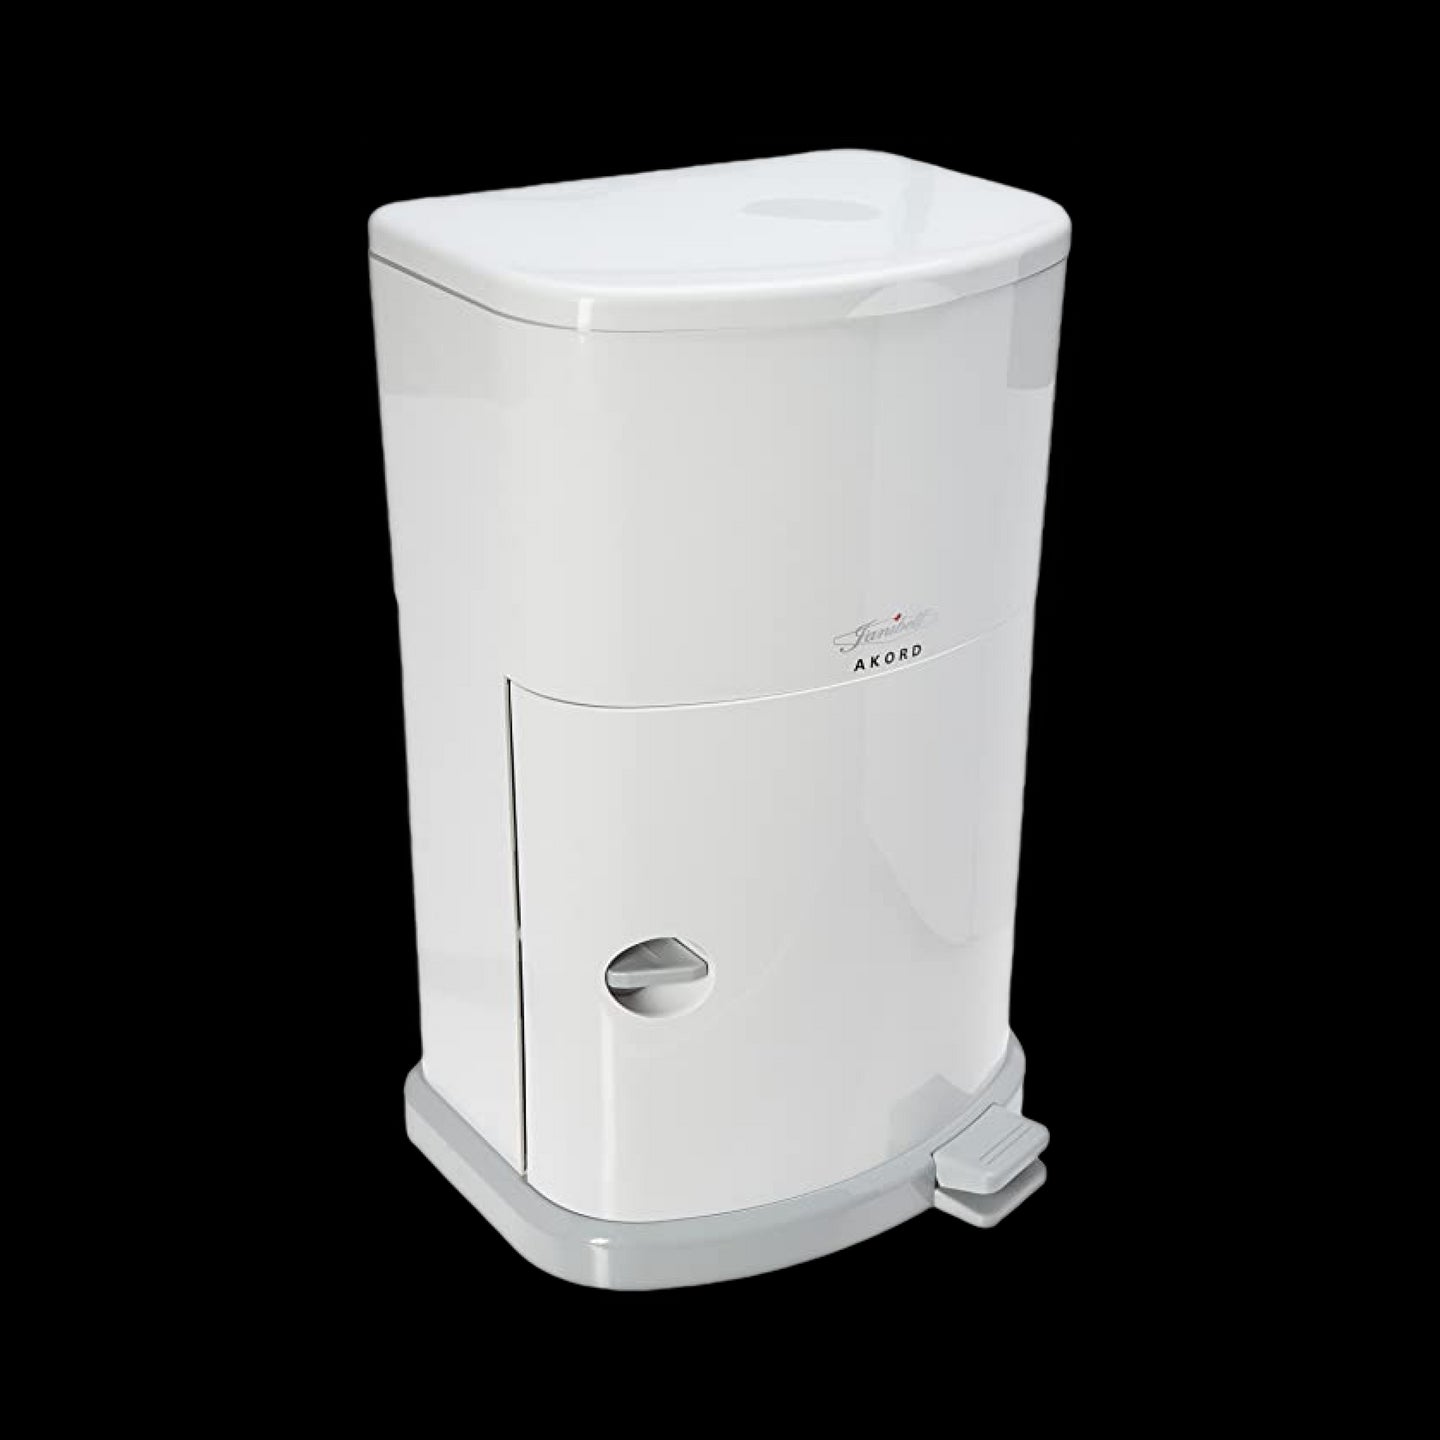 Adult Diaper Disposal System, 11 Gallon, White